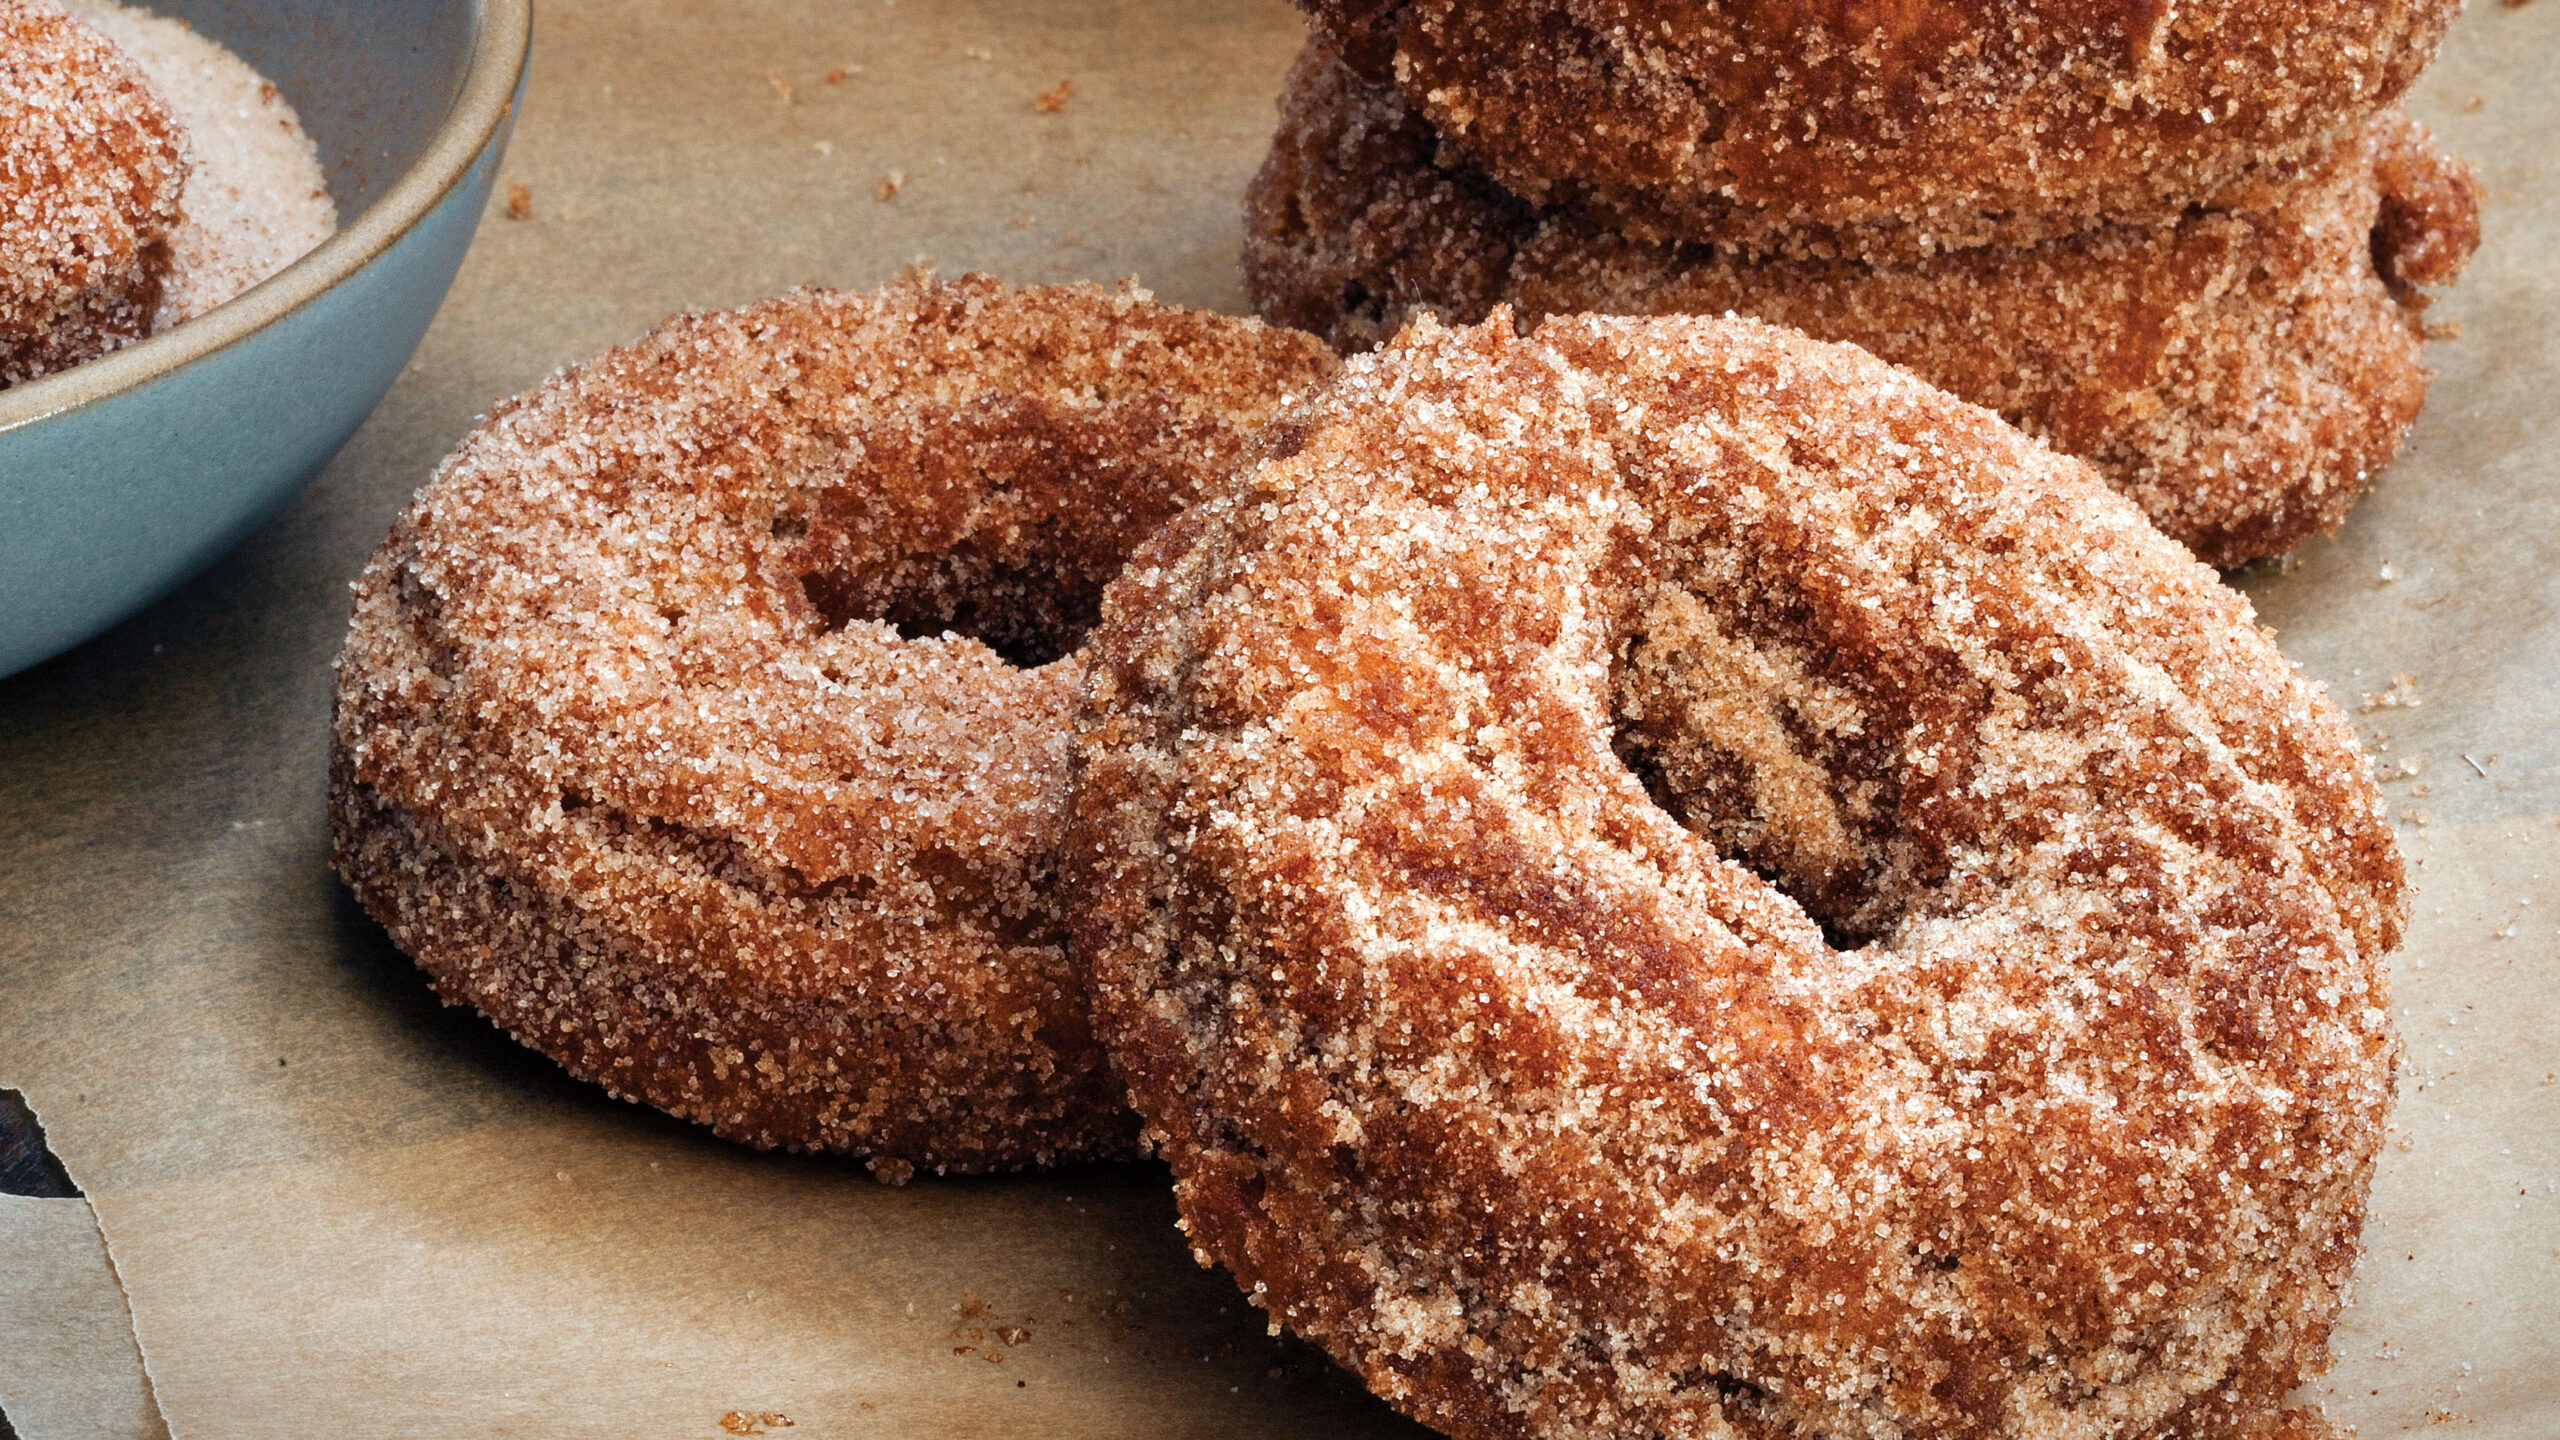 Vermont Cider Donuts recipe by Amy Traverso, from The Apple Lover's Cookbook, Photos Copyright © 2011 by Squire Fox.